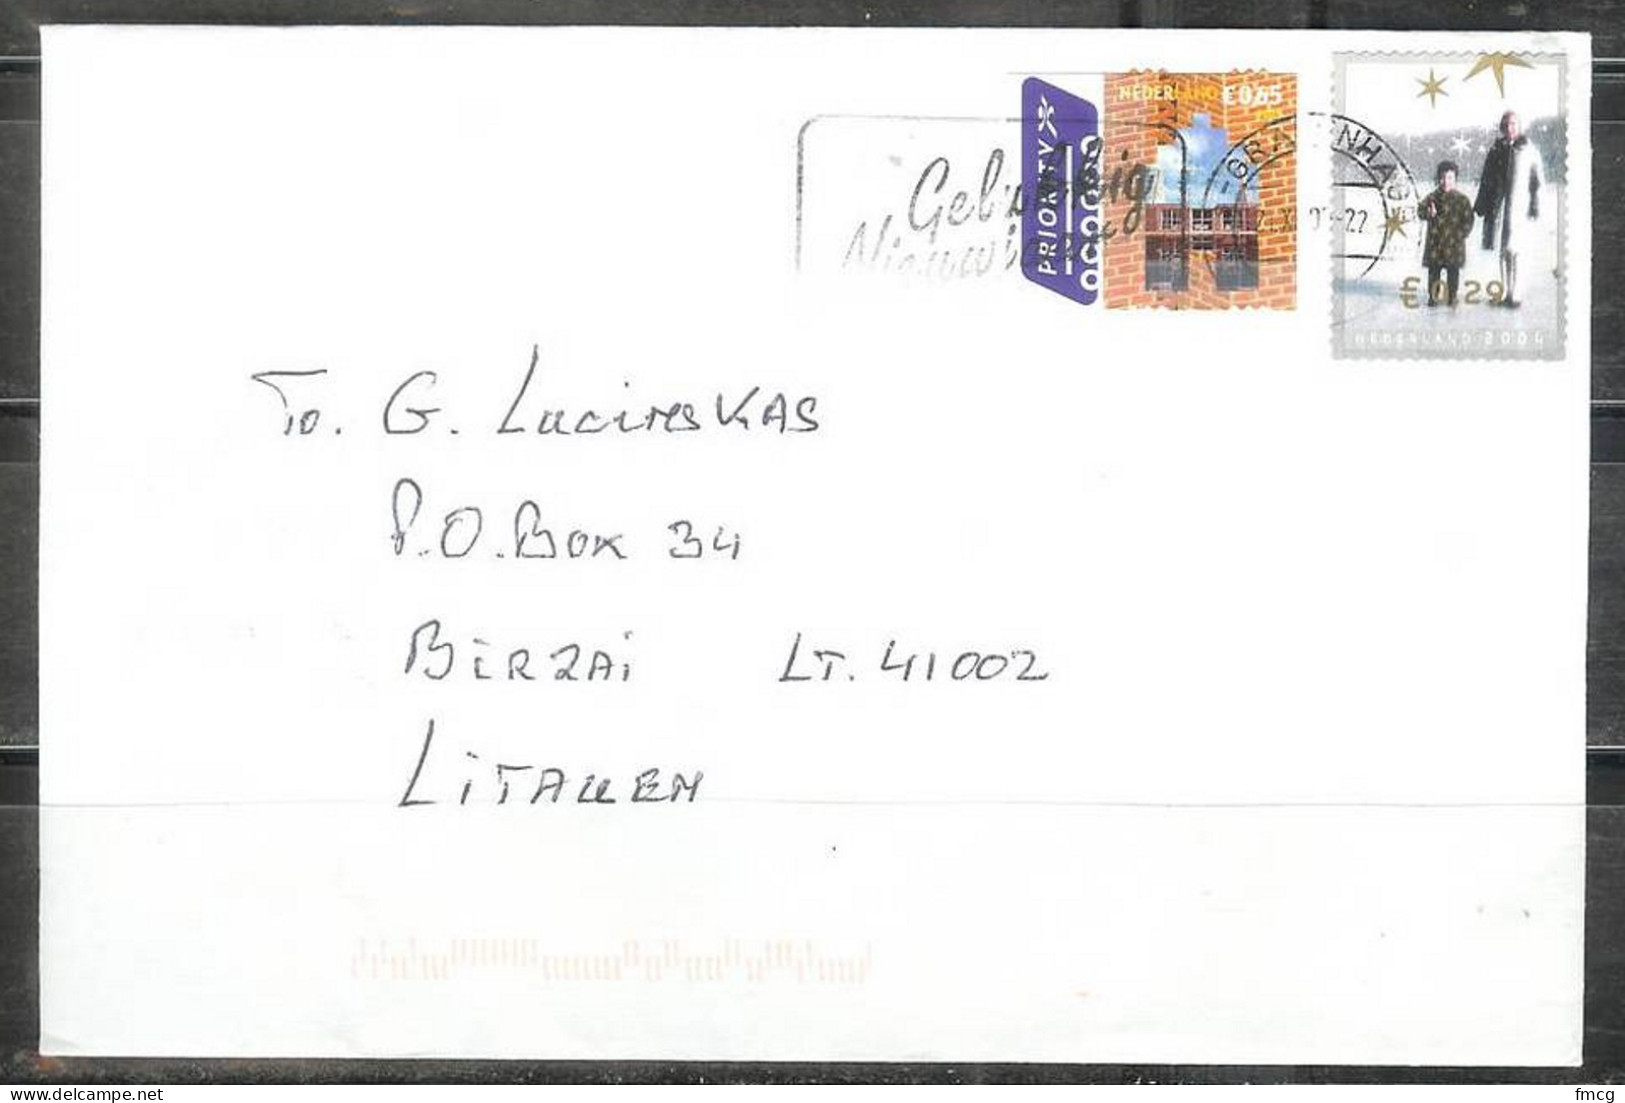 2004 December Holiday Stamps To Lithuania - Covers & Documents